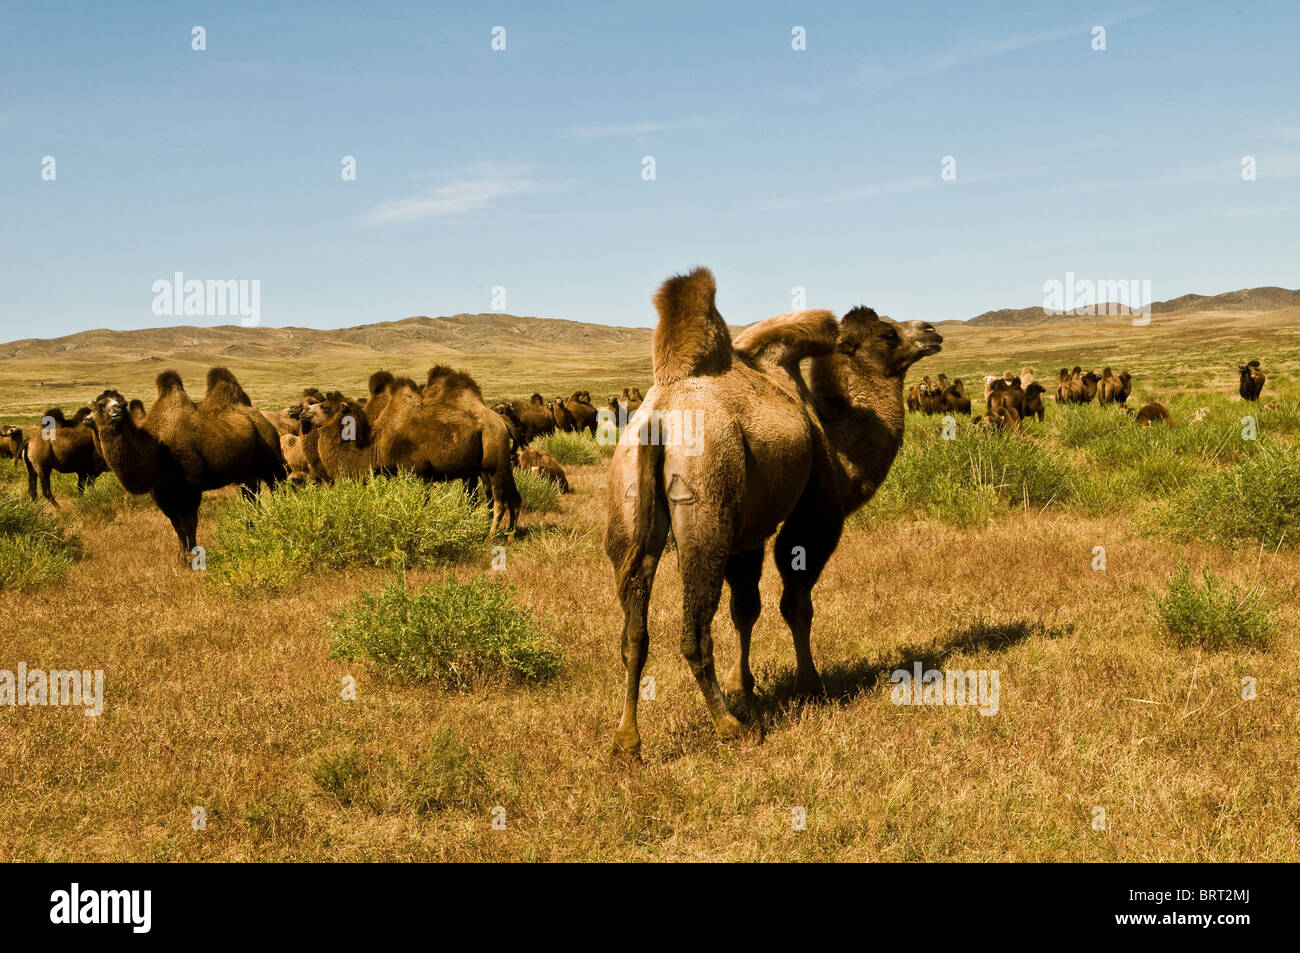 Double hump - Bactrian - camels in Mongolia. Stock Photo